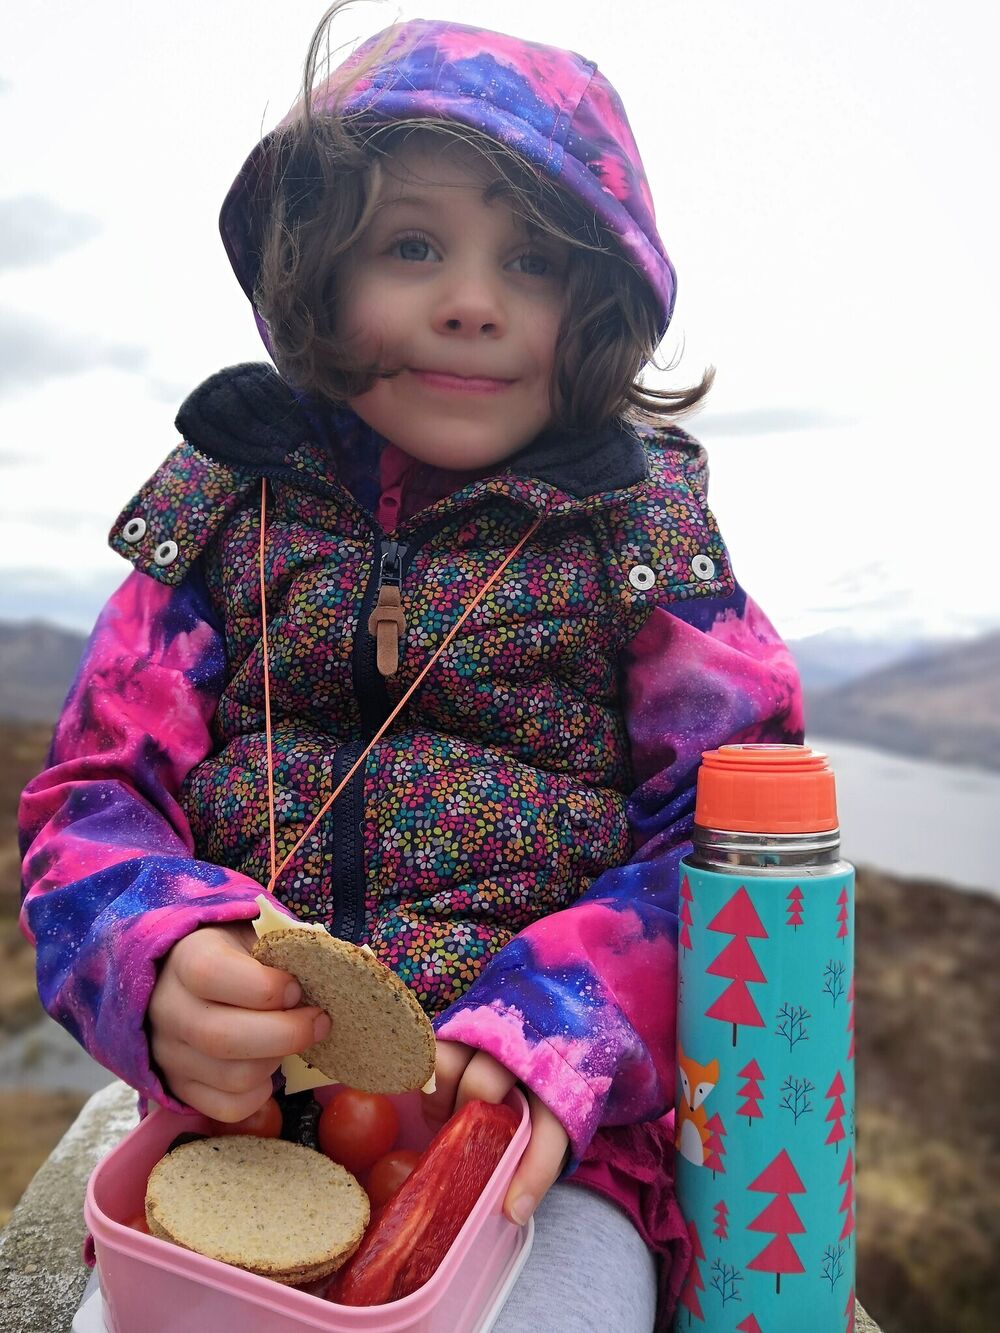 Small girl eating from a lunch box, with a loch behind her in the distance.